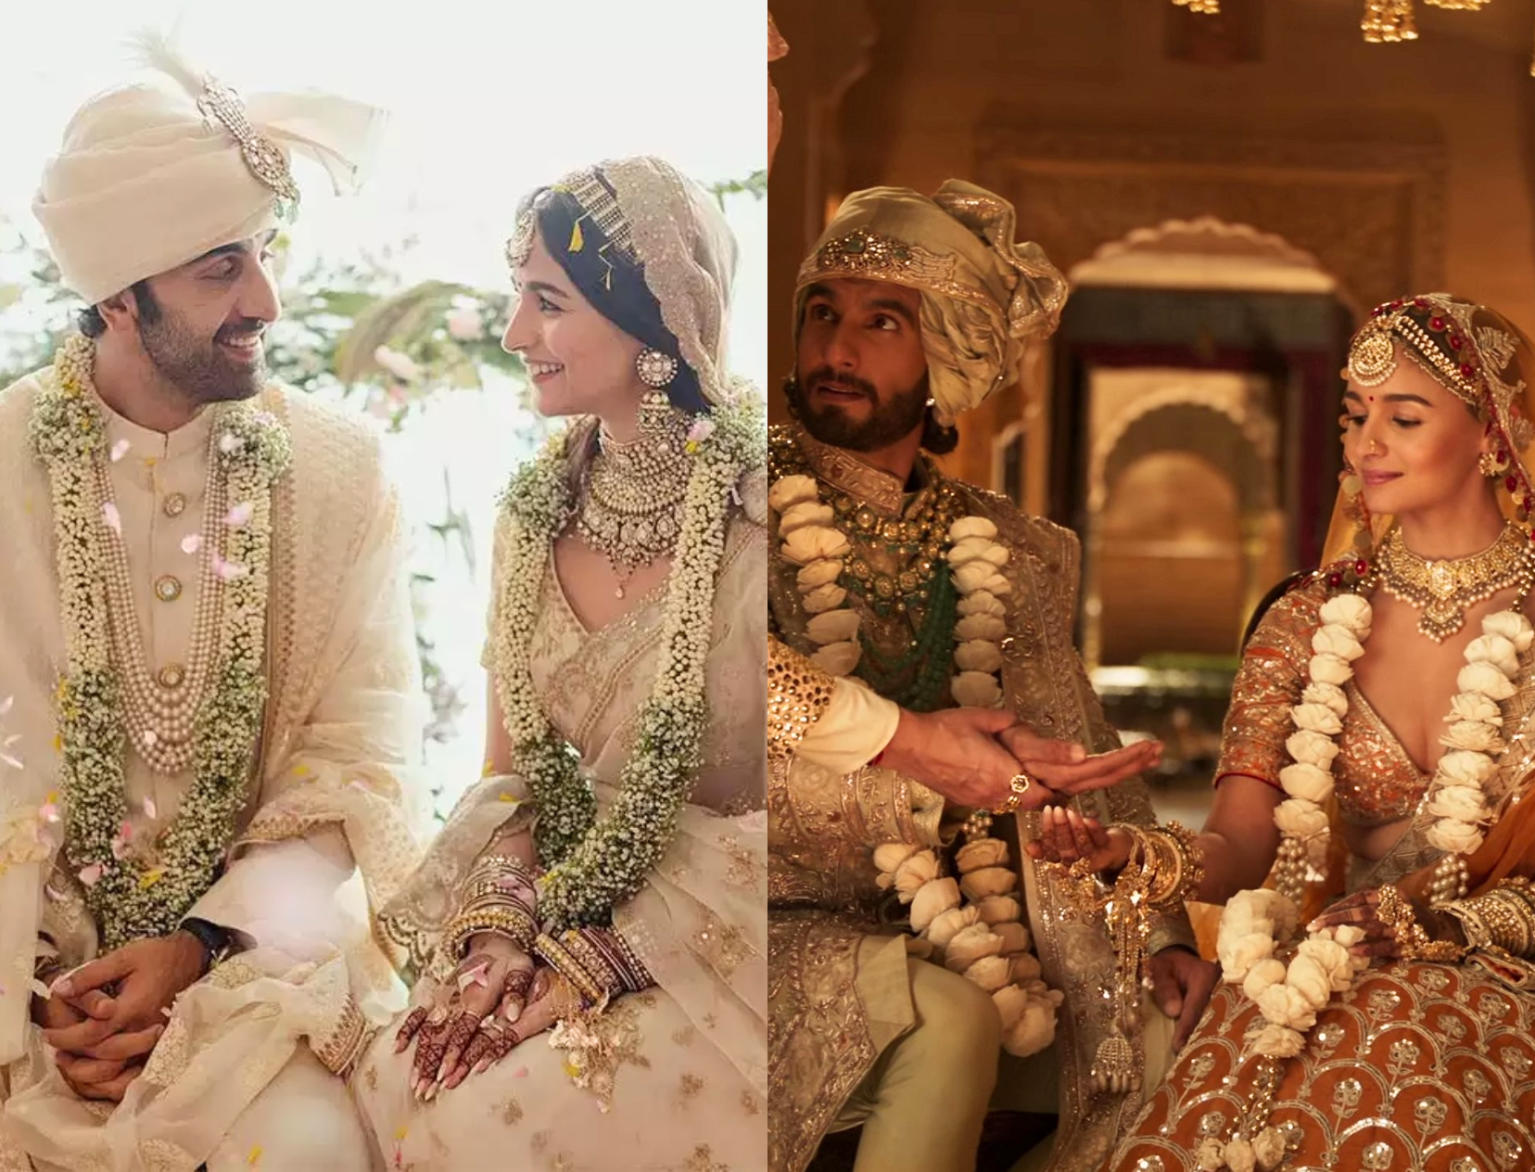 Karan Johar claims that Alia Bhatt "was married twice in four days" and that she appeared in the Rocky Aur Rani Kii Prem Kahaani song wearing her actual wedding "mehendi."